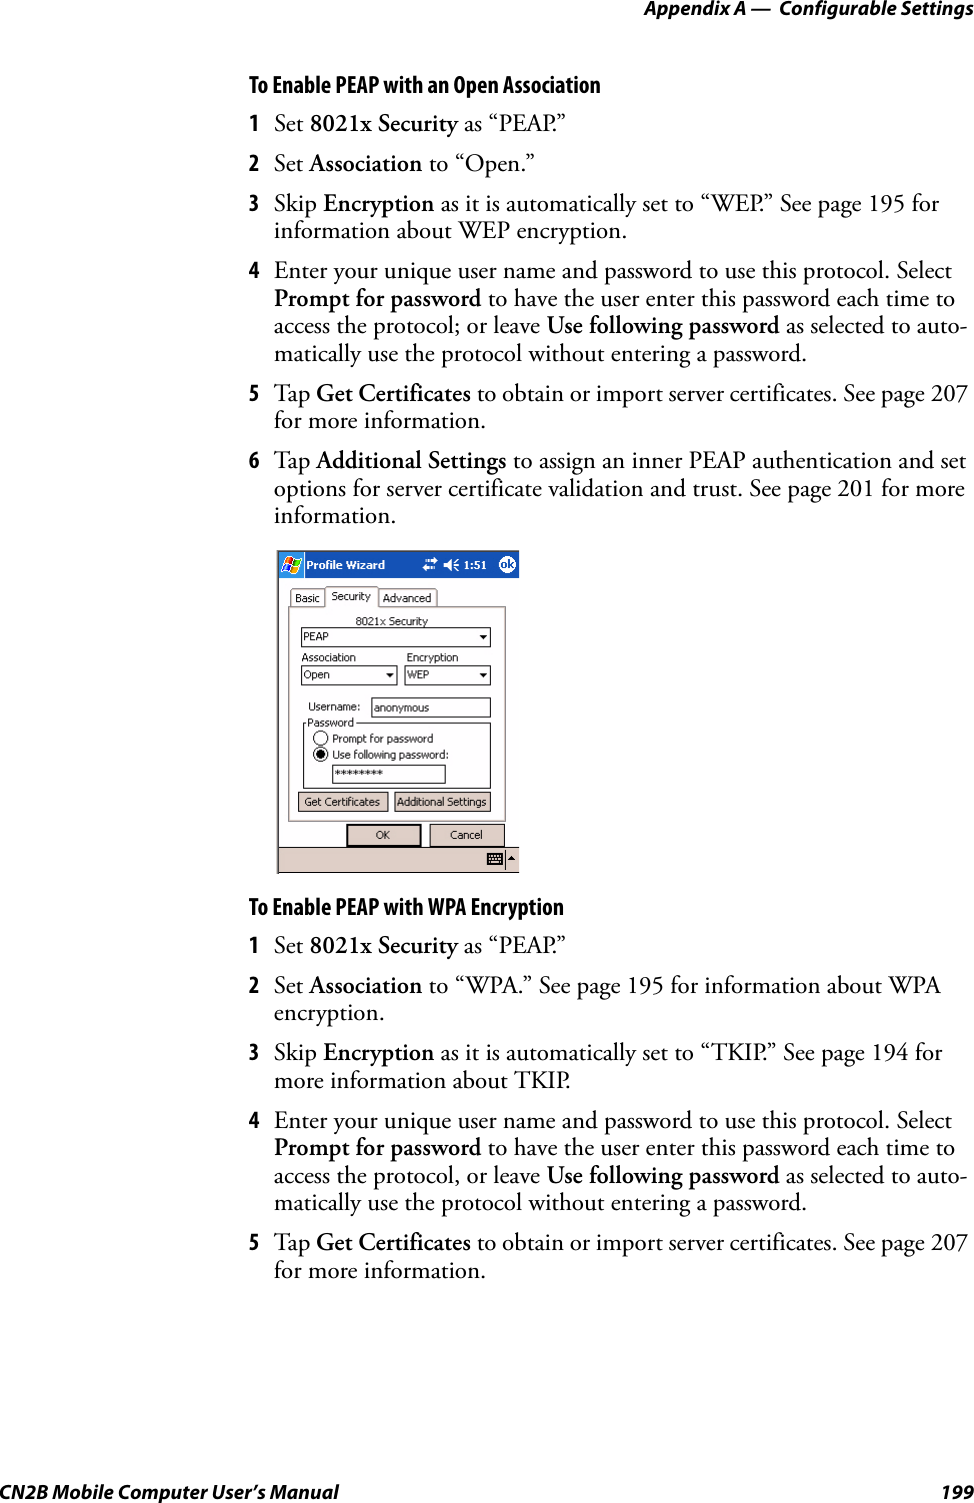 Appendix A —  Configurable SettingsCN2B Mobile Computer User’s Manual 199To Enable PEAP with an Open Association1Set 8021x Security as “PEAP.”2Set Association to “Open.”3Skip Encryption as it is automatically set to “WEP.” See page 195 for information about WEP encryption.4Enter your unique user name and password to use this protocol. Select Prompt for password to have the user enter this password each time to access the protocol; or leave Use following password as selected to auto-matically use the protocol without entering a password.5Tap  Get Certificates to obtain or import server certificates. See page 207 for more information.6Tap  Additional Settings to assign an inner PEAP authentication and set options for server certificate validation and trust. See page 201 for more information.To Enable PEAP with WPA Encryption1Set 8021x Security as “PEAP.”2Set Association to “WPA.” See page 195 for information about WPA encryption.3Skip Encryption as it is automatically set to “TKIP.” See page 194 for more information about TKIP.4Enter your unique user name and password to use this protocol. Select Prompt for password to have the user enter this password each time to access the protocol, or leave Use following password as selected to auto-matically use the protocol without entering a password.5Tap  Get Certificates to obtain or import server certificates. See page 207 for more information.